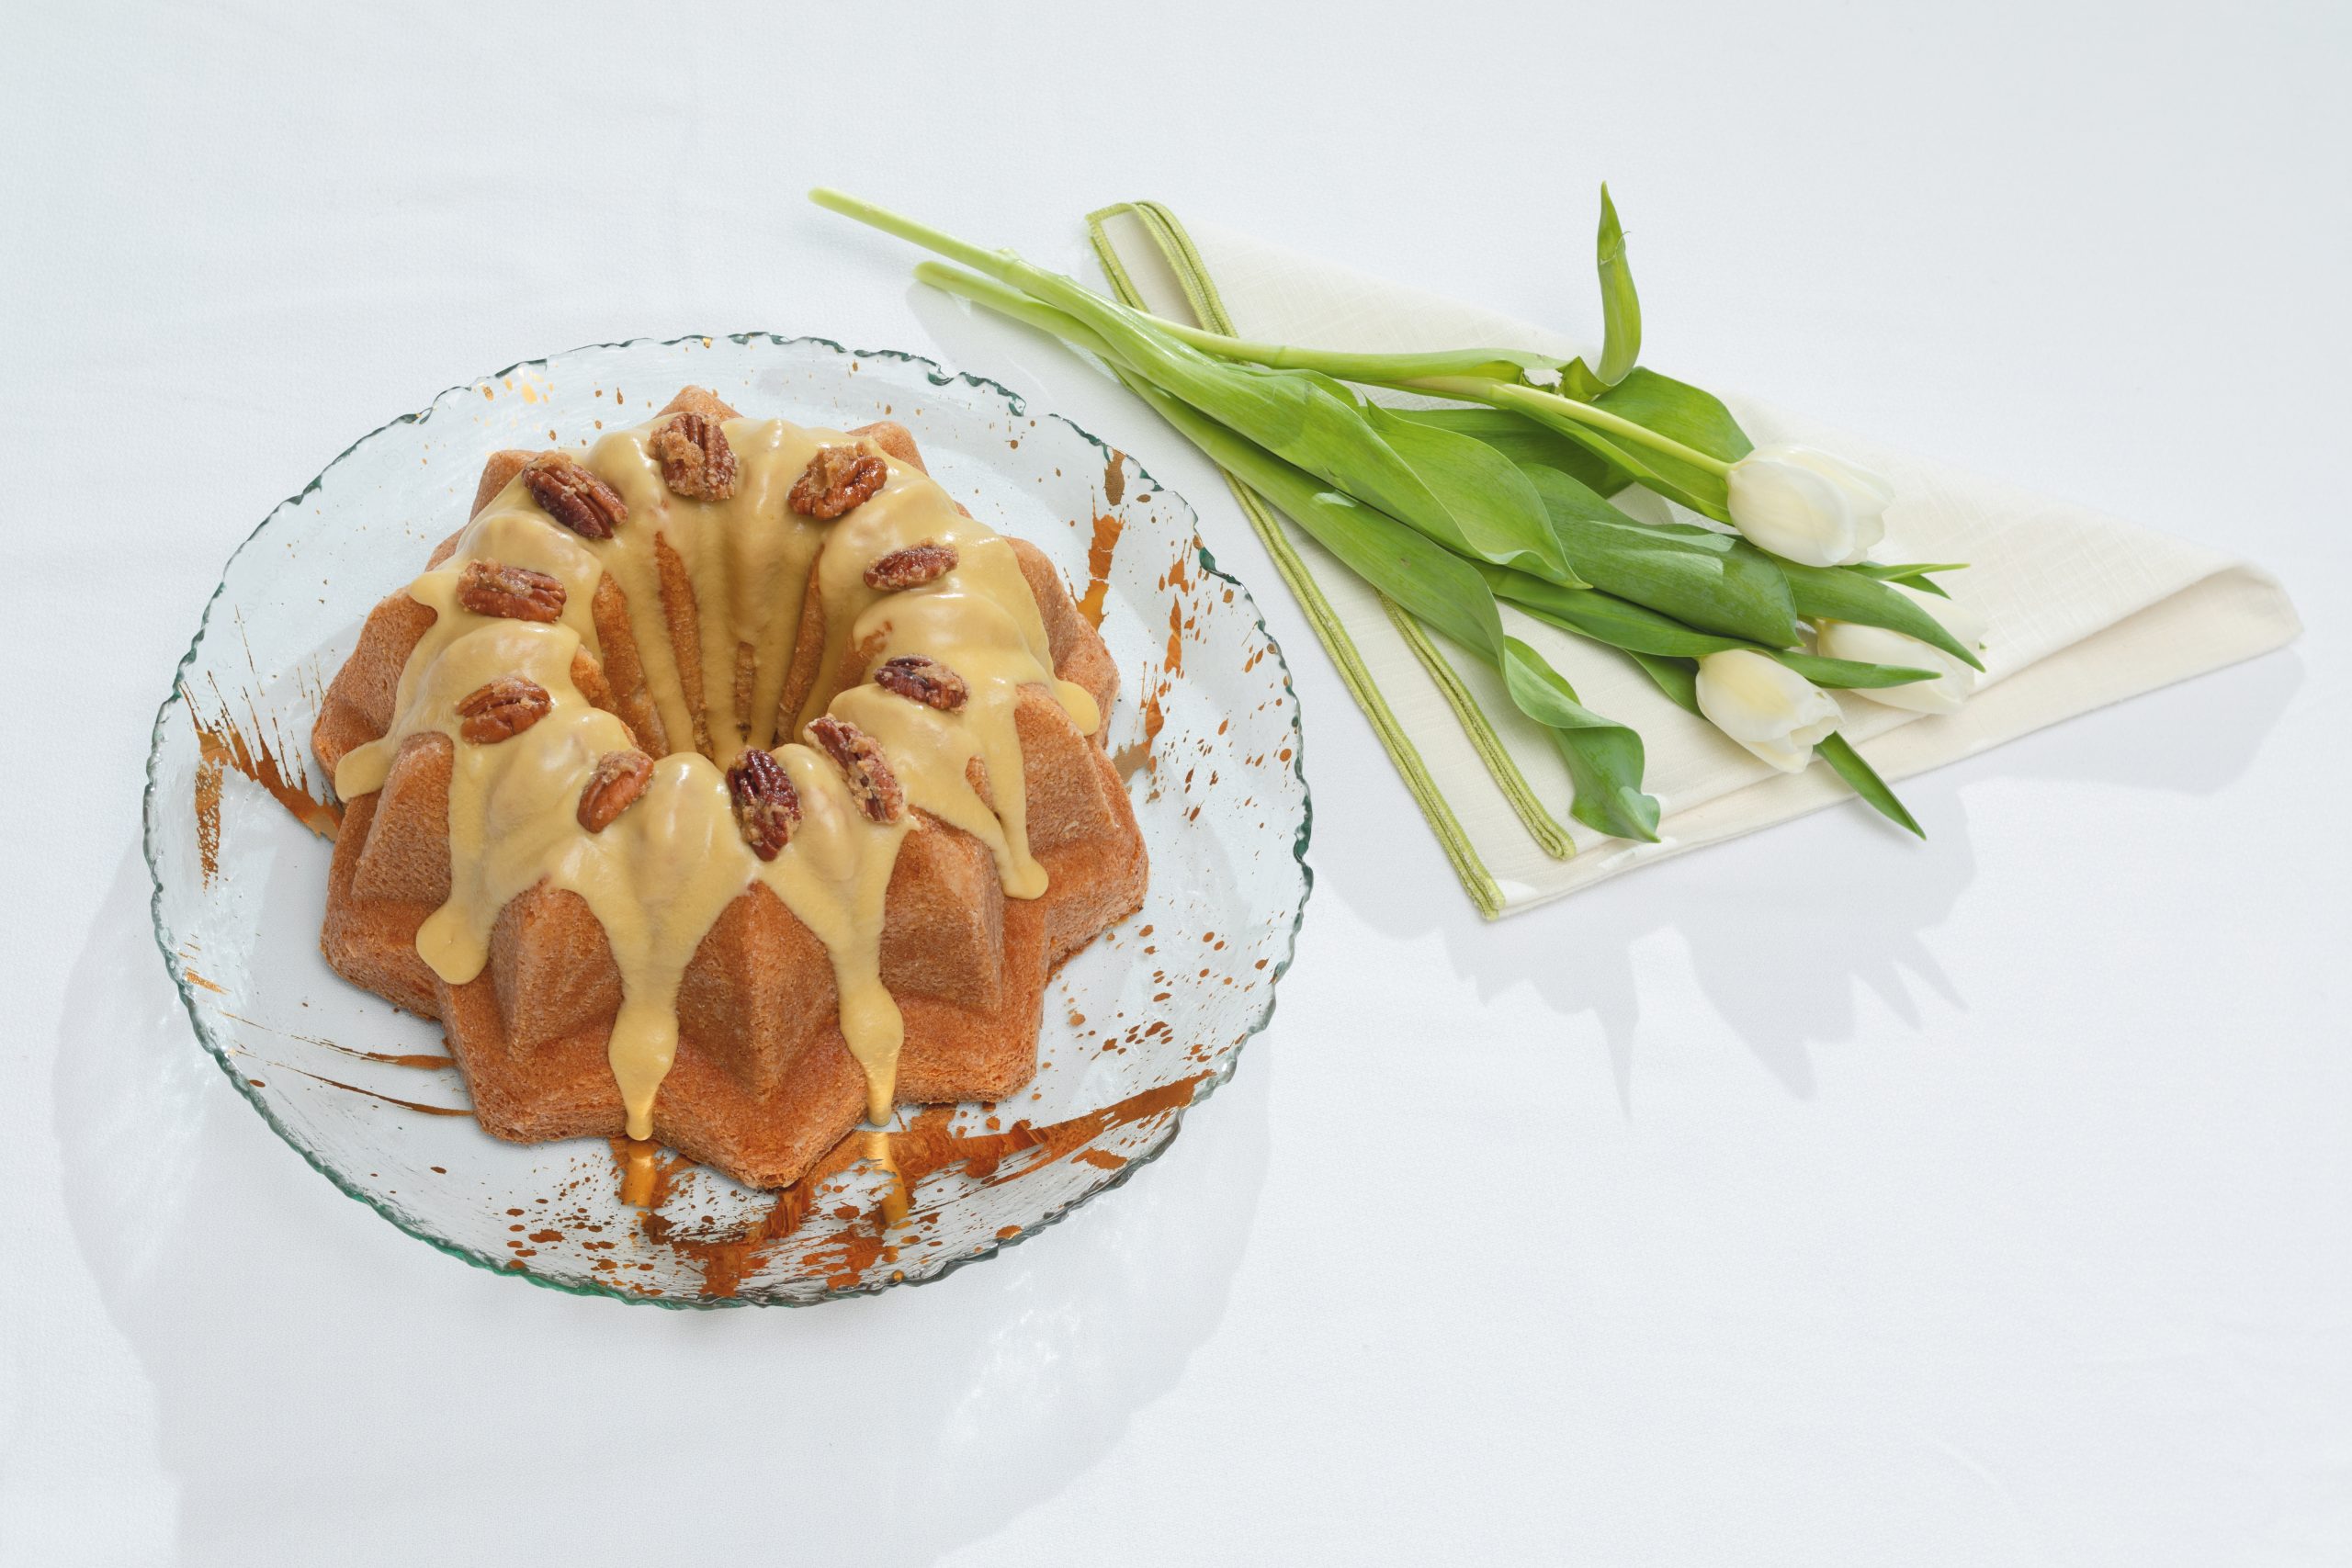 Using dark brown sugar gives this Brown Sugar Cake, also called Ed’s Favorite Pound Cake, additional moisture and character. Courtesy of non(e)such: Annieglass plate with Swing napkins in Natural/Lime.